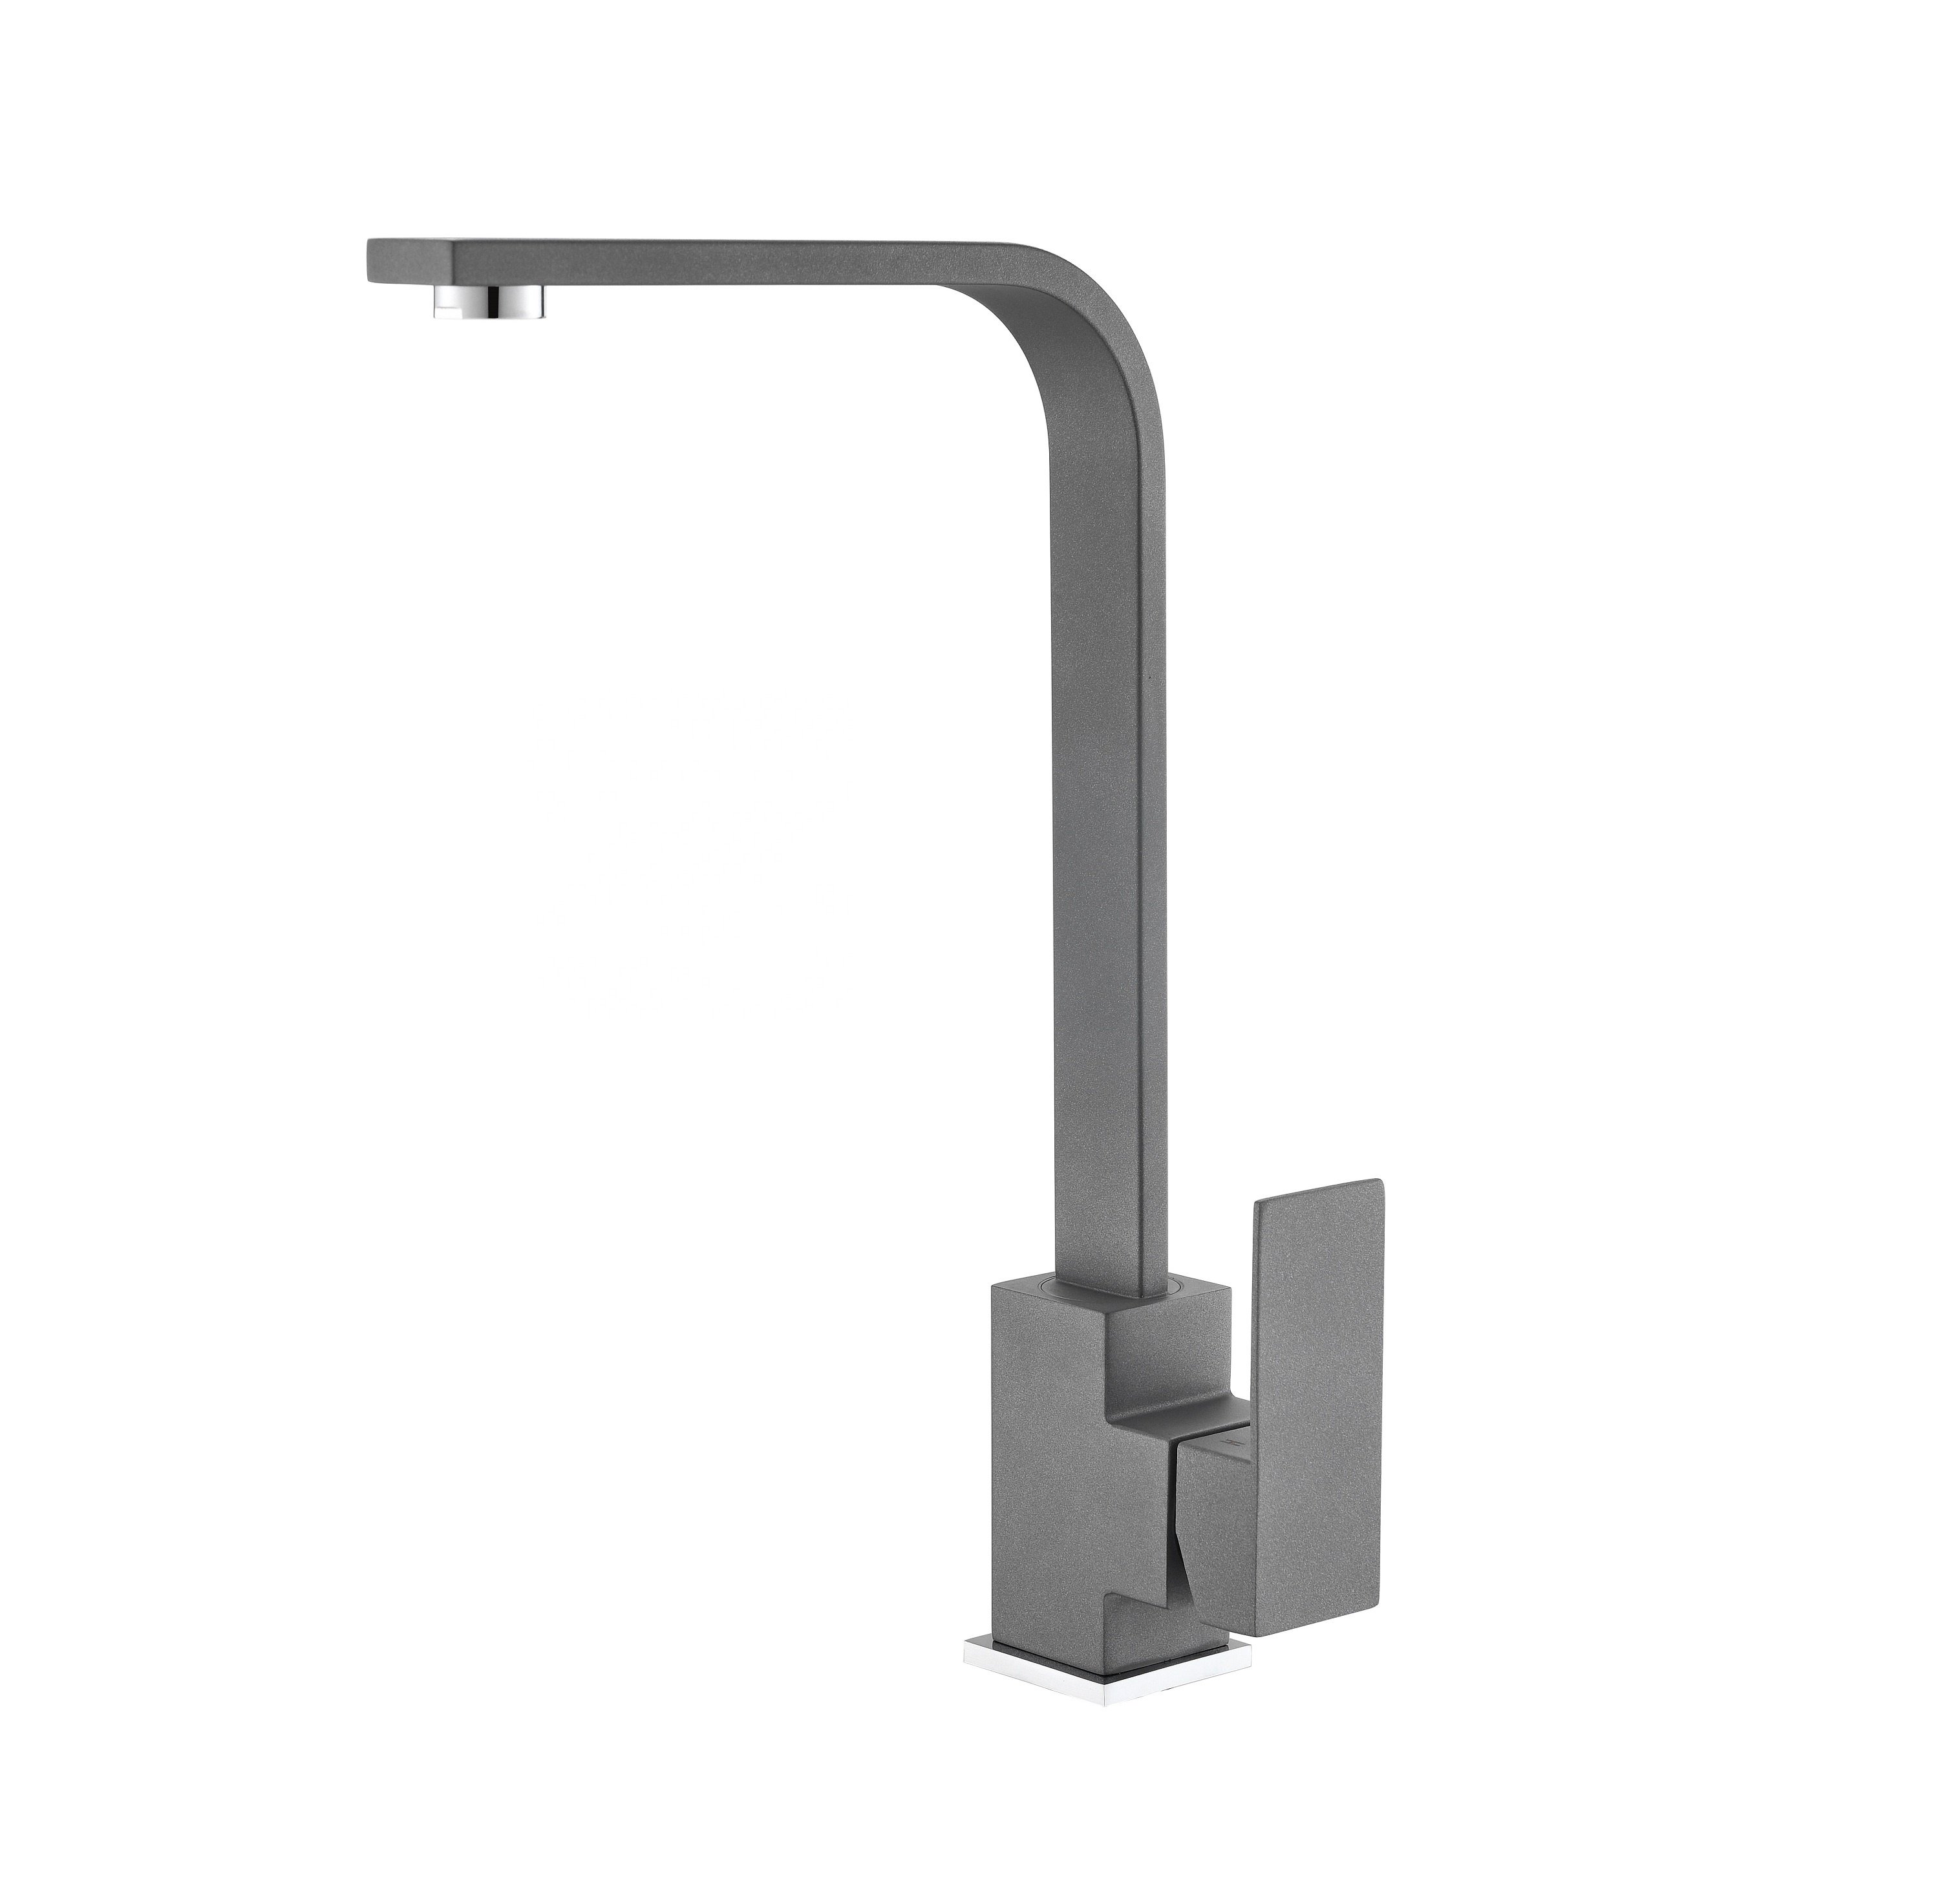 The Square Faucet Matte Black Nuevo diseño Modern Pull Out Spray Kitchen Faucet